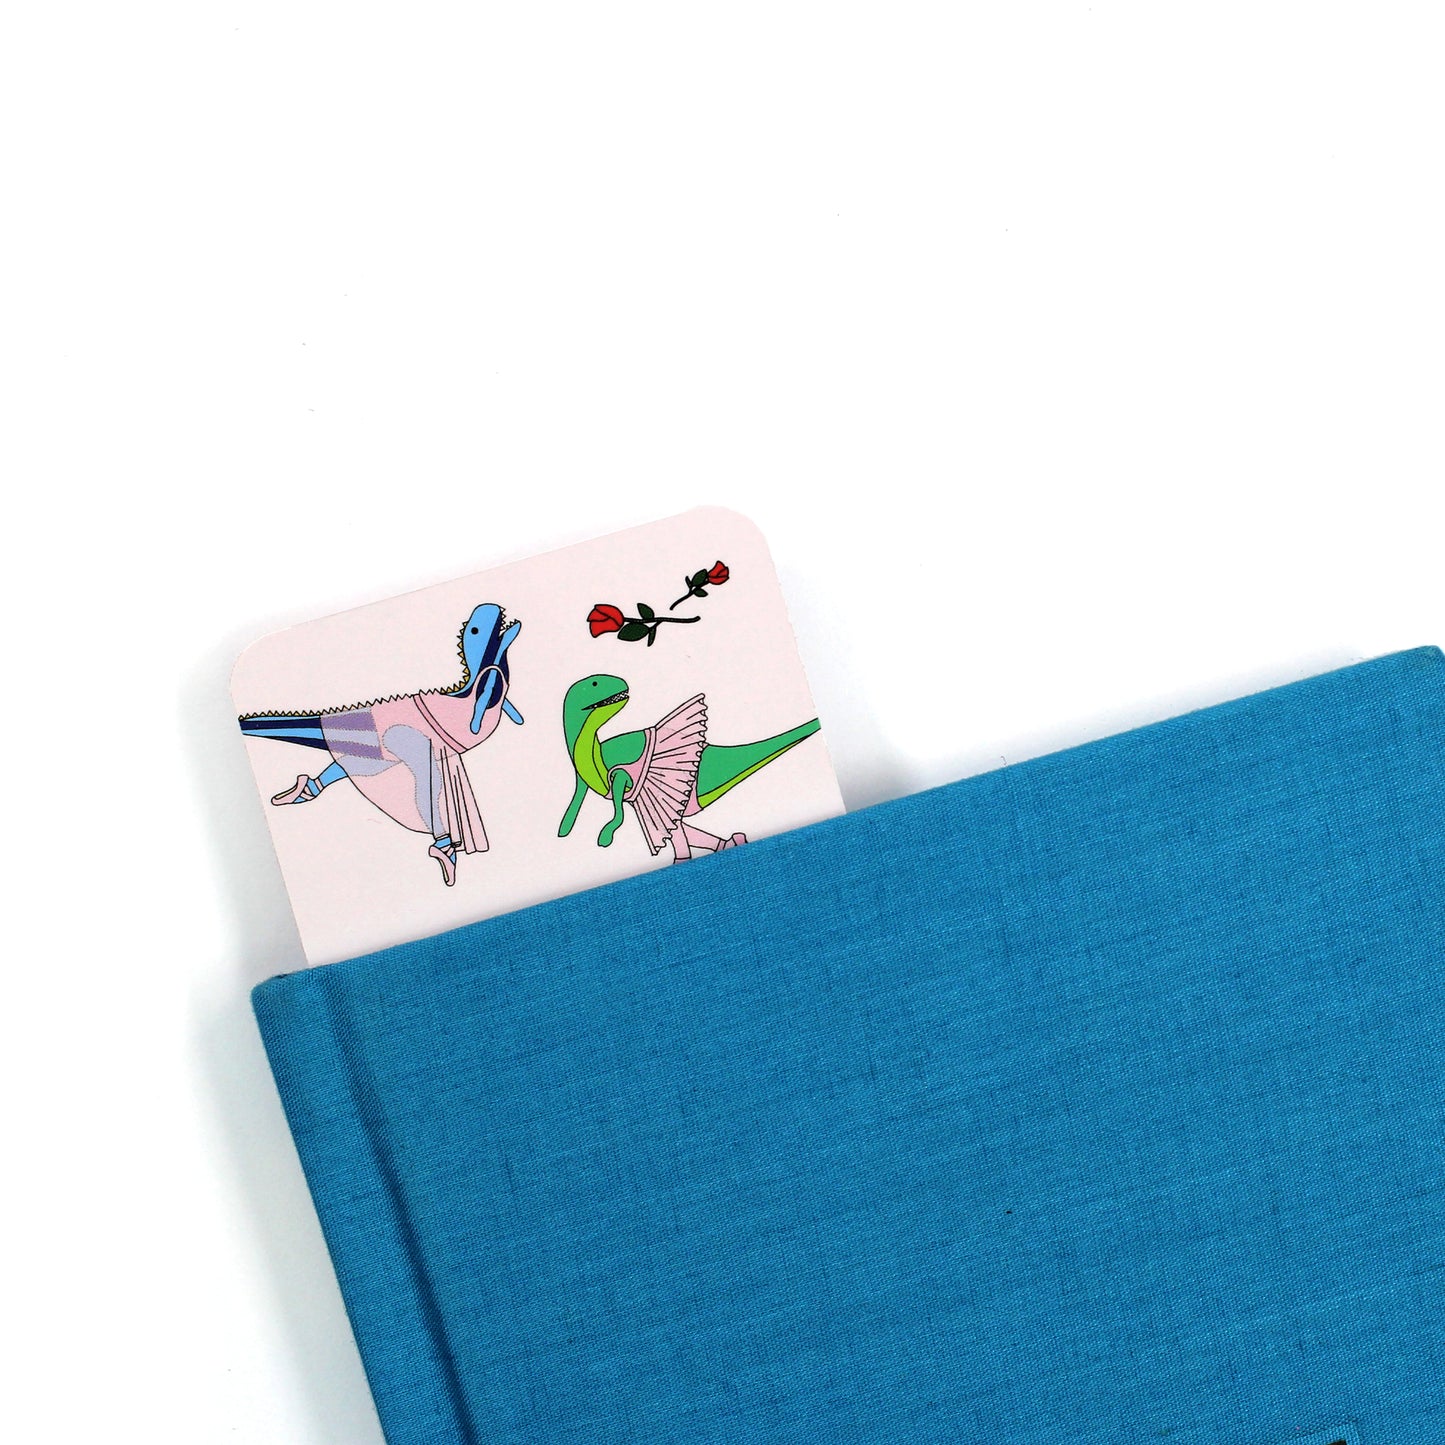 ballet dinosaur bookmark coming out of a blue book